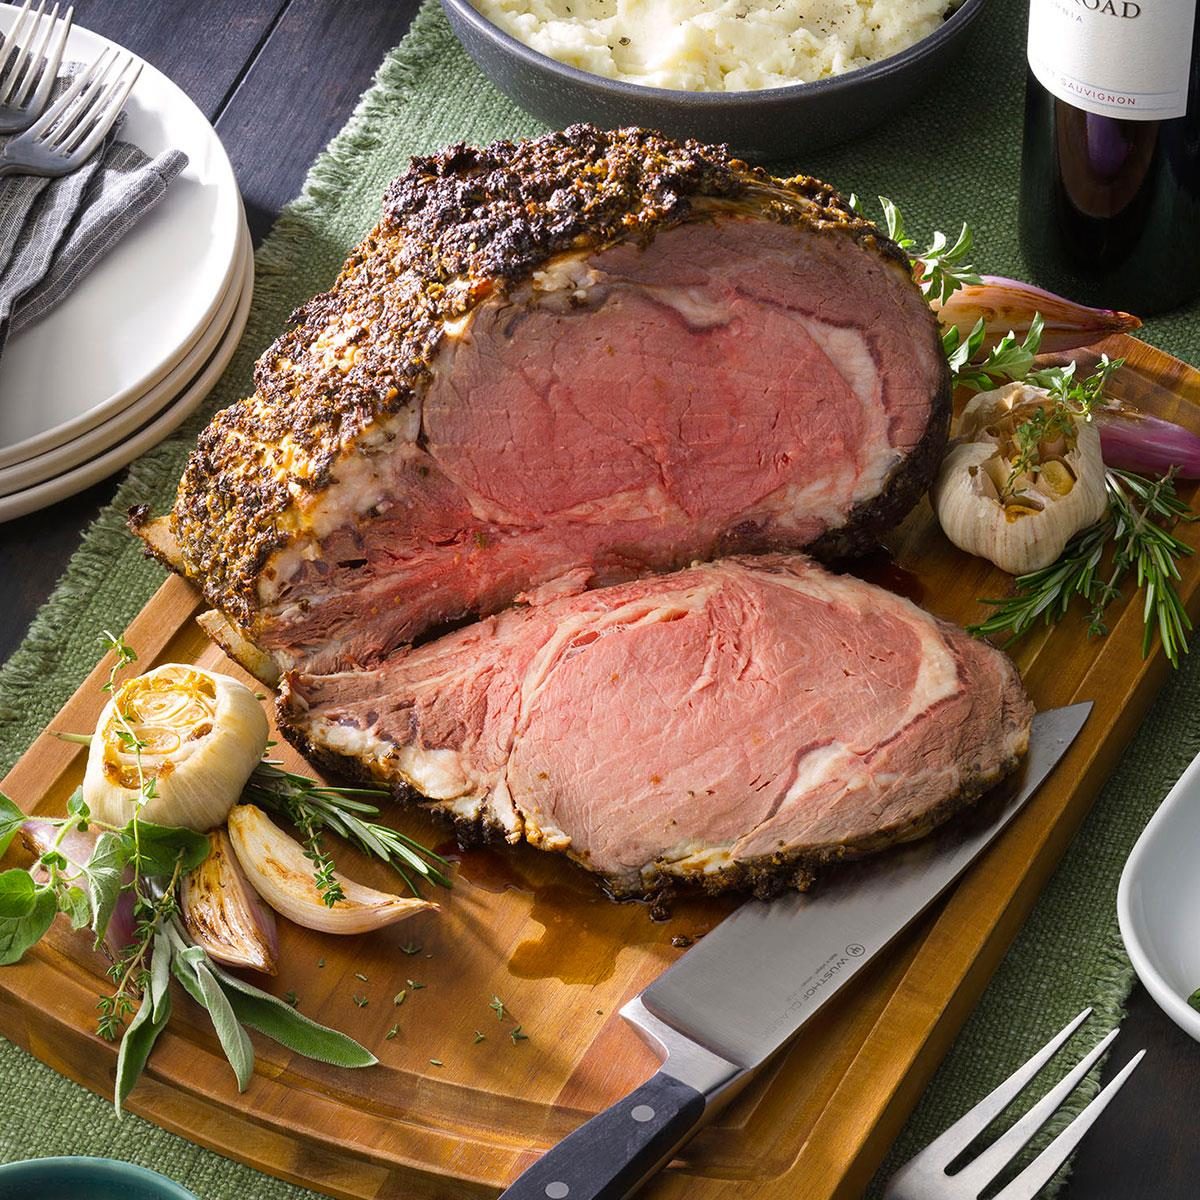 https://www.tasteofhome.com/wp-content/uploads/2018/01/Herb-Crusted-Prime-Rib_EXPS_RDPDCTOHX23_42237_P3_GNS_10_05_8b.jpg